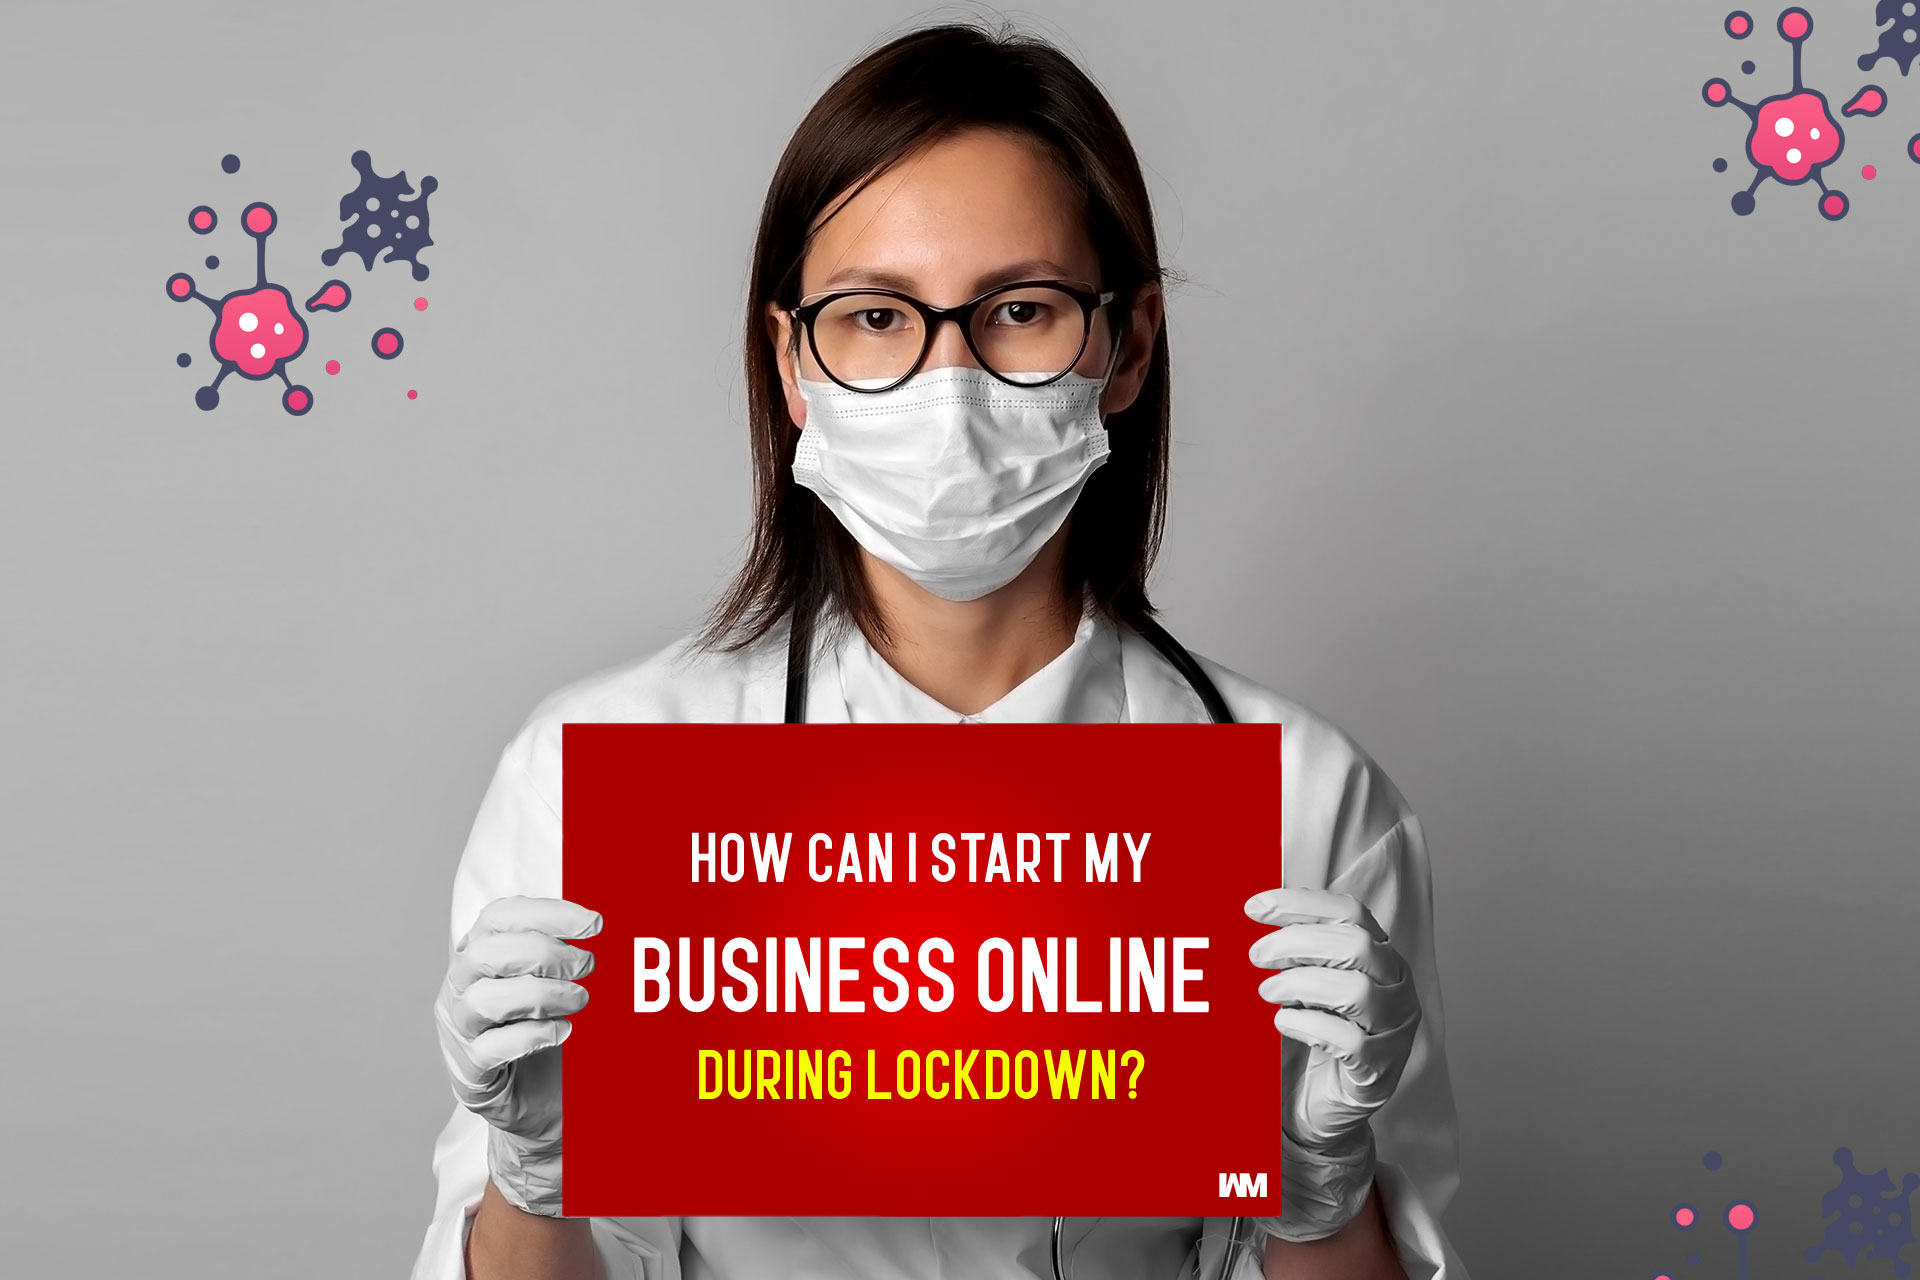 How can I start my business online during lockdown